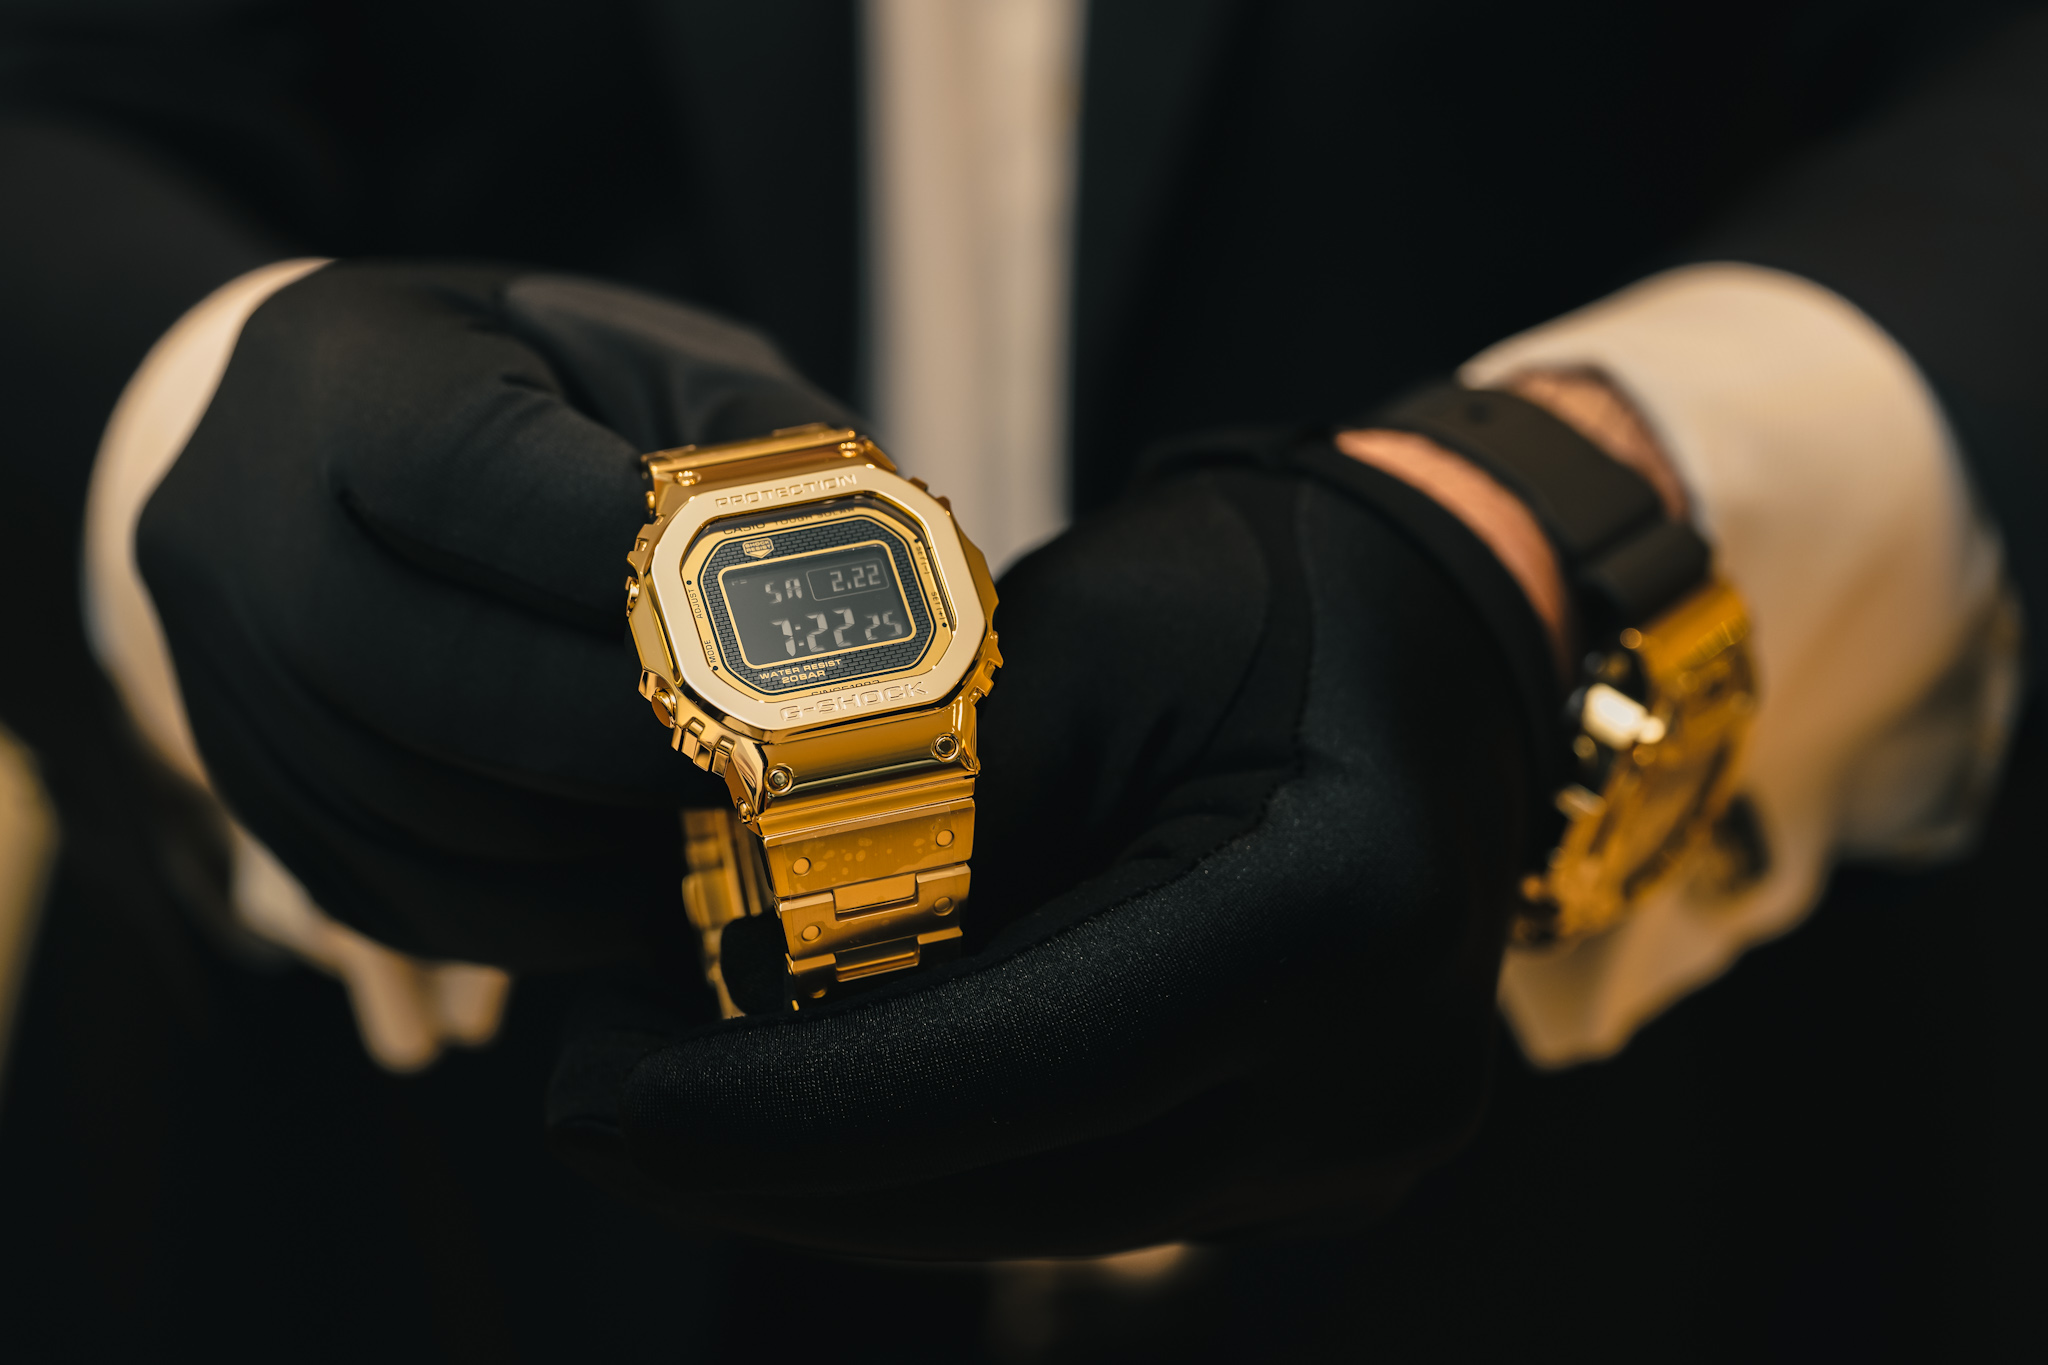 Unboxing The Solid Gold G Shock G D5000 9jr Dream Project At